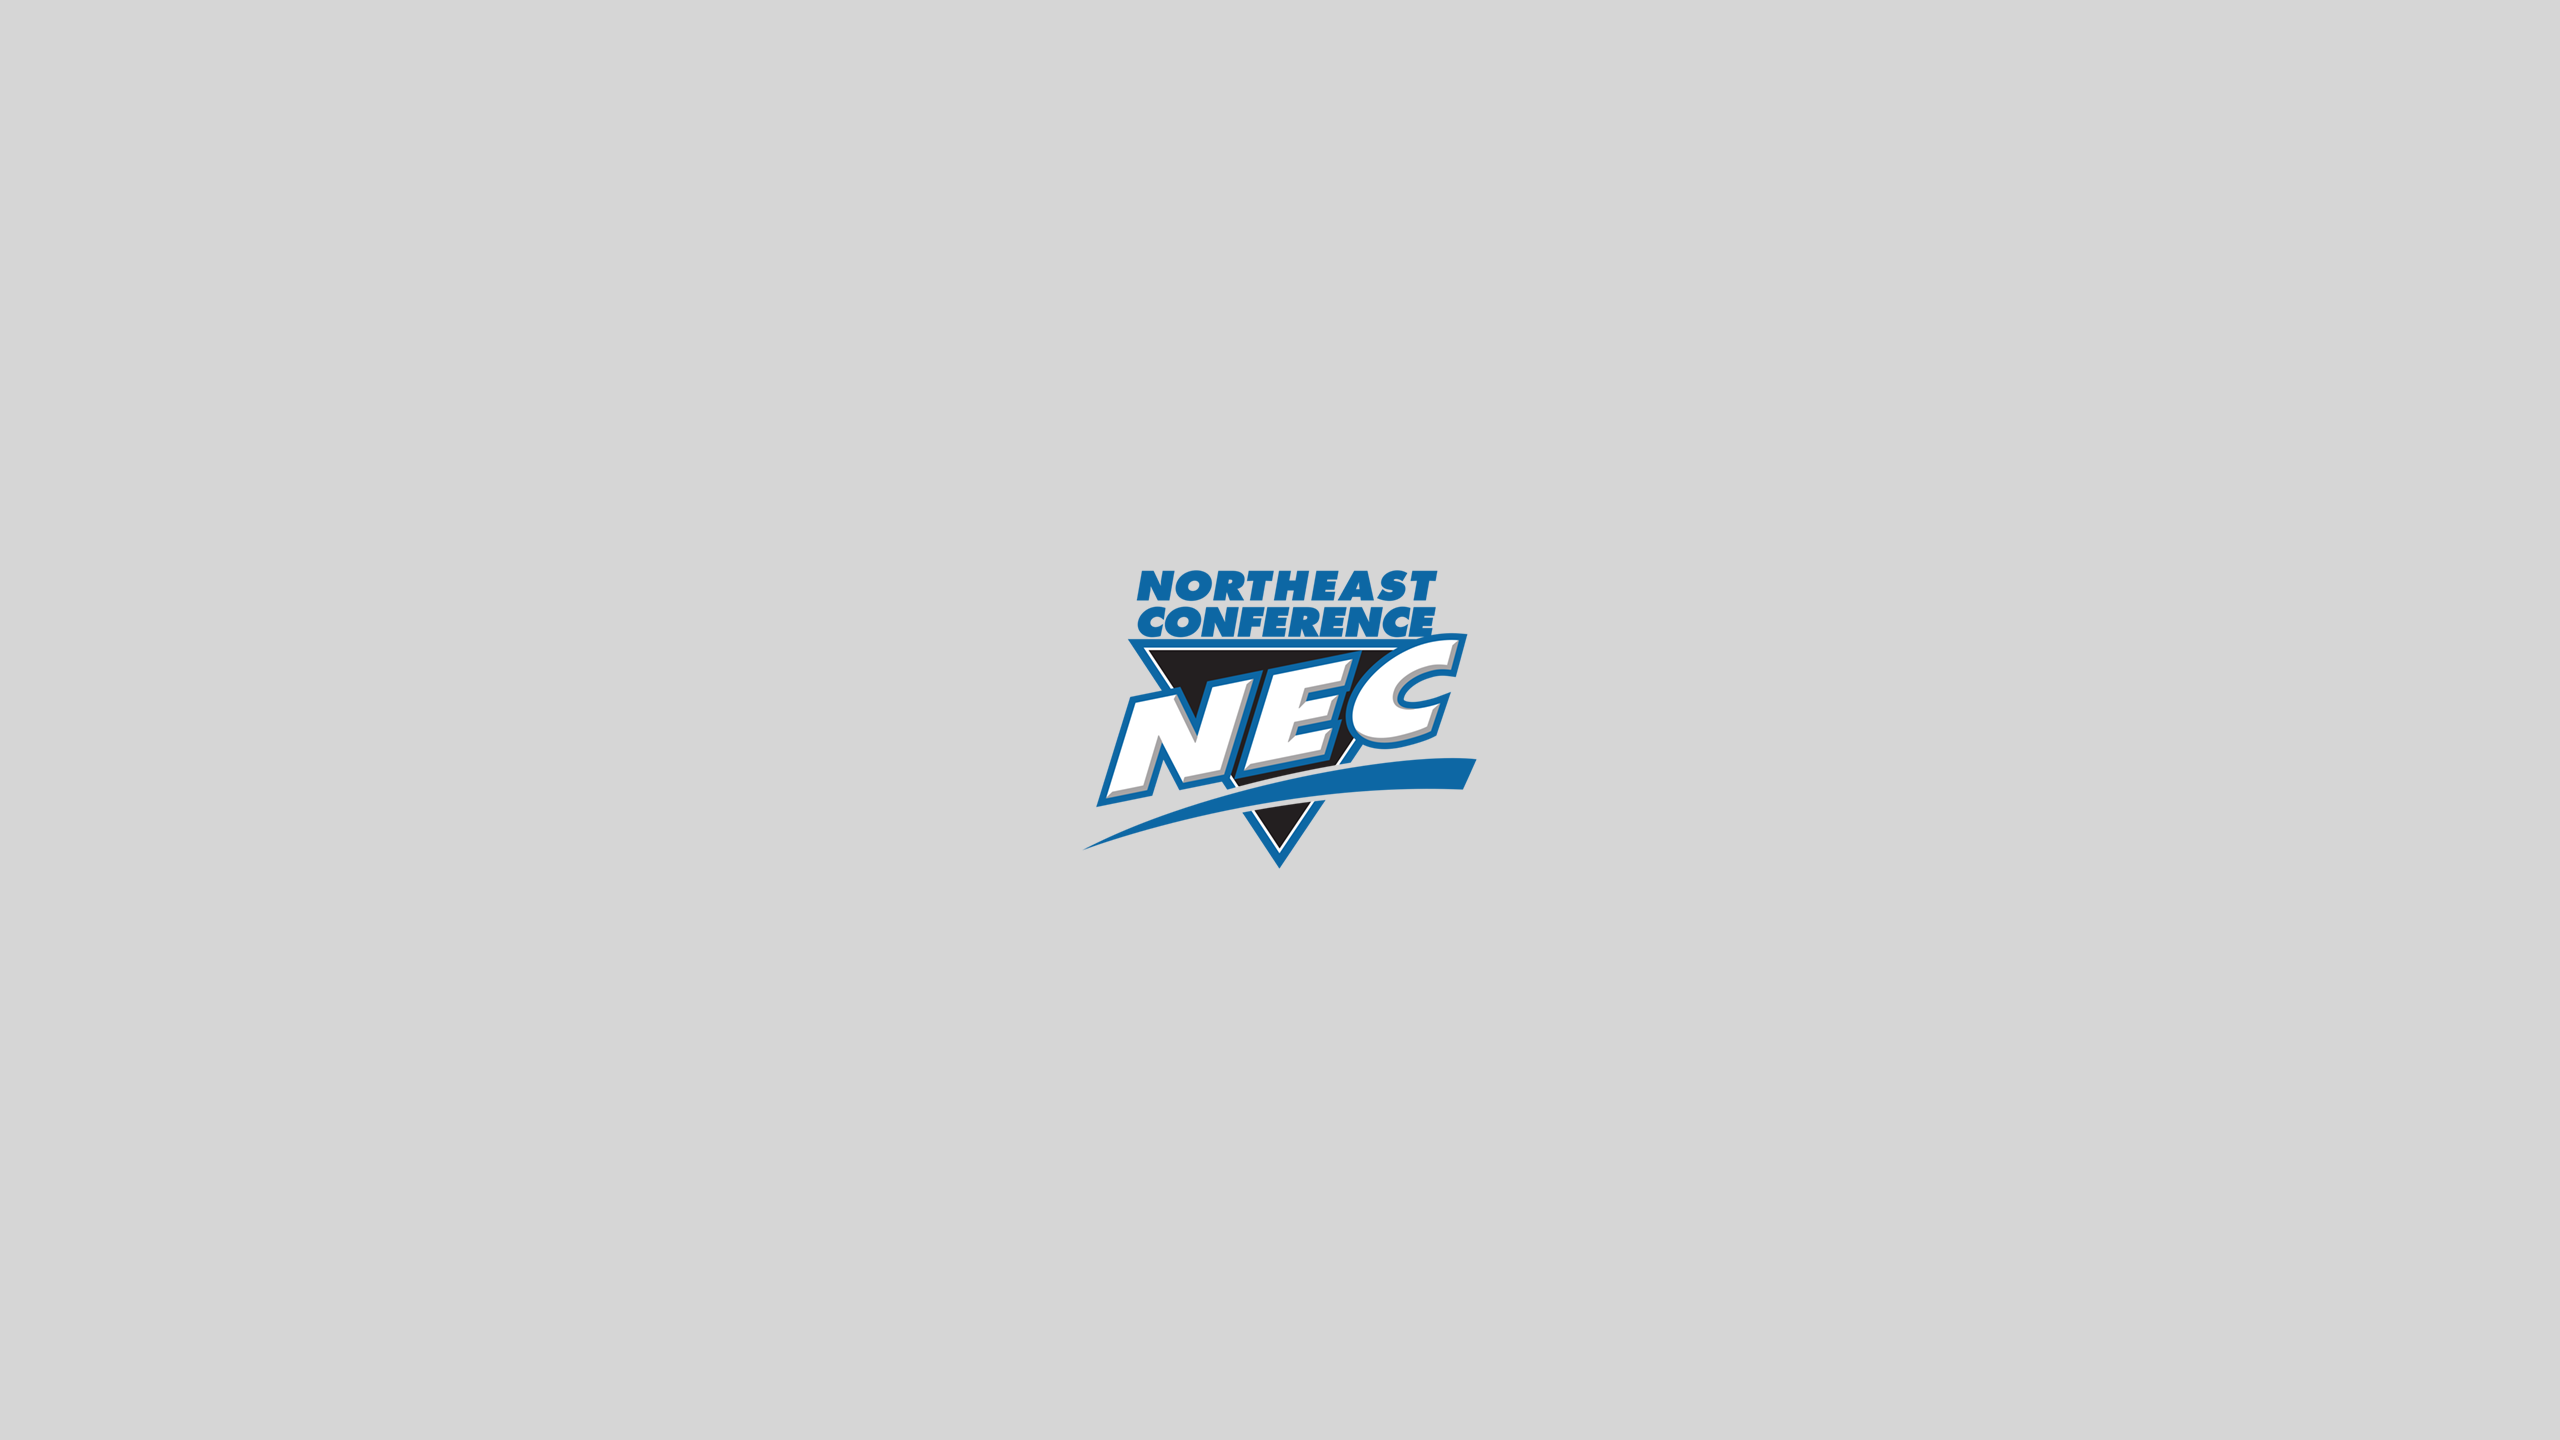 Northeast Conference Basketball - NCAAB - Square Bettor